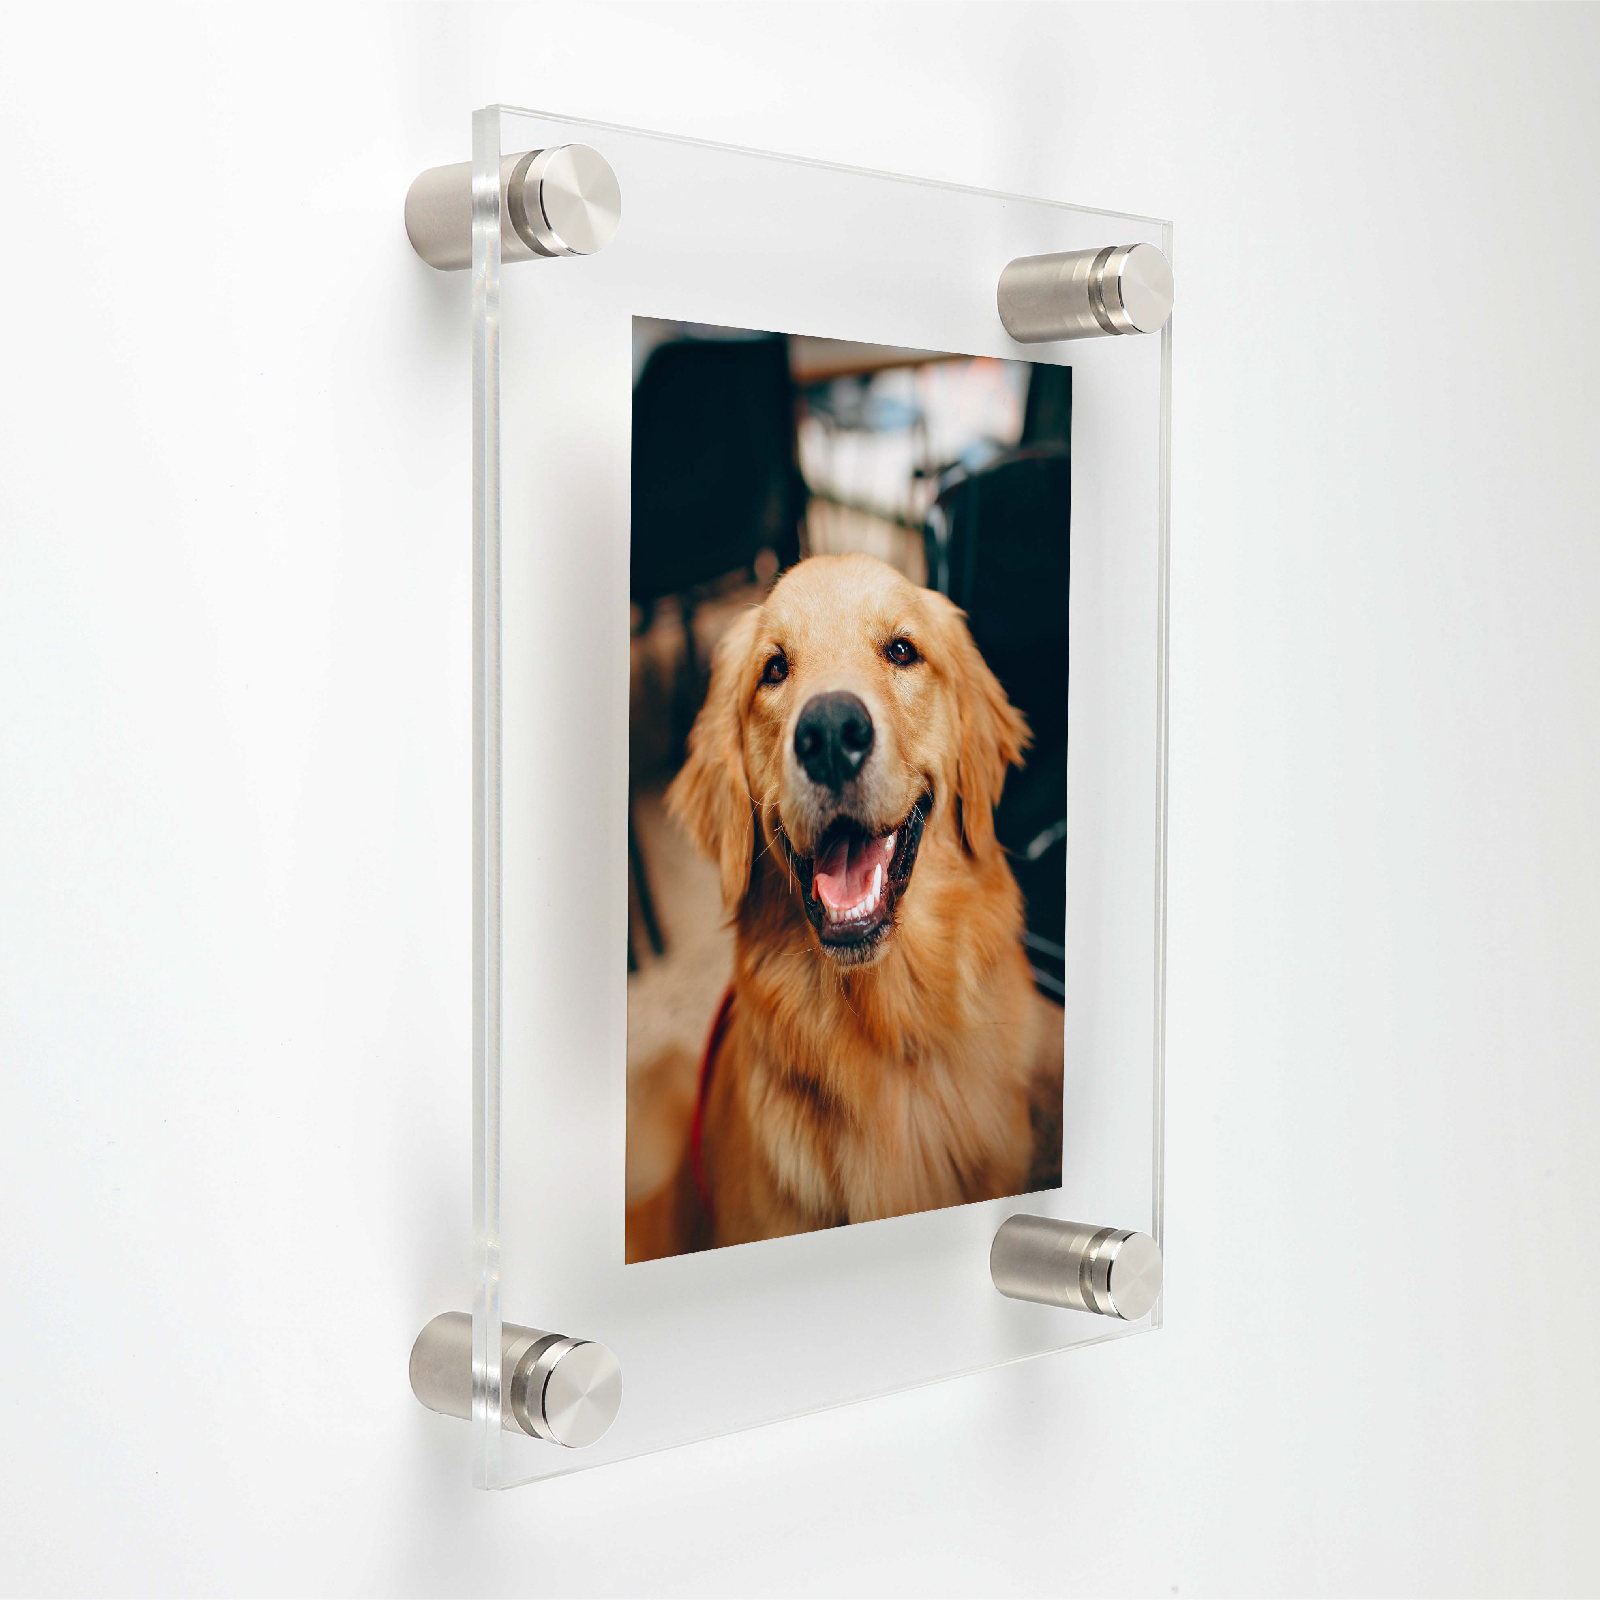 (2) 7-1/2'' x 9-1/2'' Clear Acrylics , Pre-Drilled With Polished Edges (Thick 1/8'' each), Wall Frame with (4) 5/8'' x 1'' Brushed Stainless Steel Standoffs includes Screws and Anchors